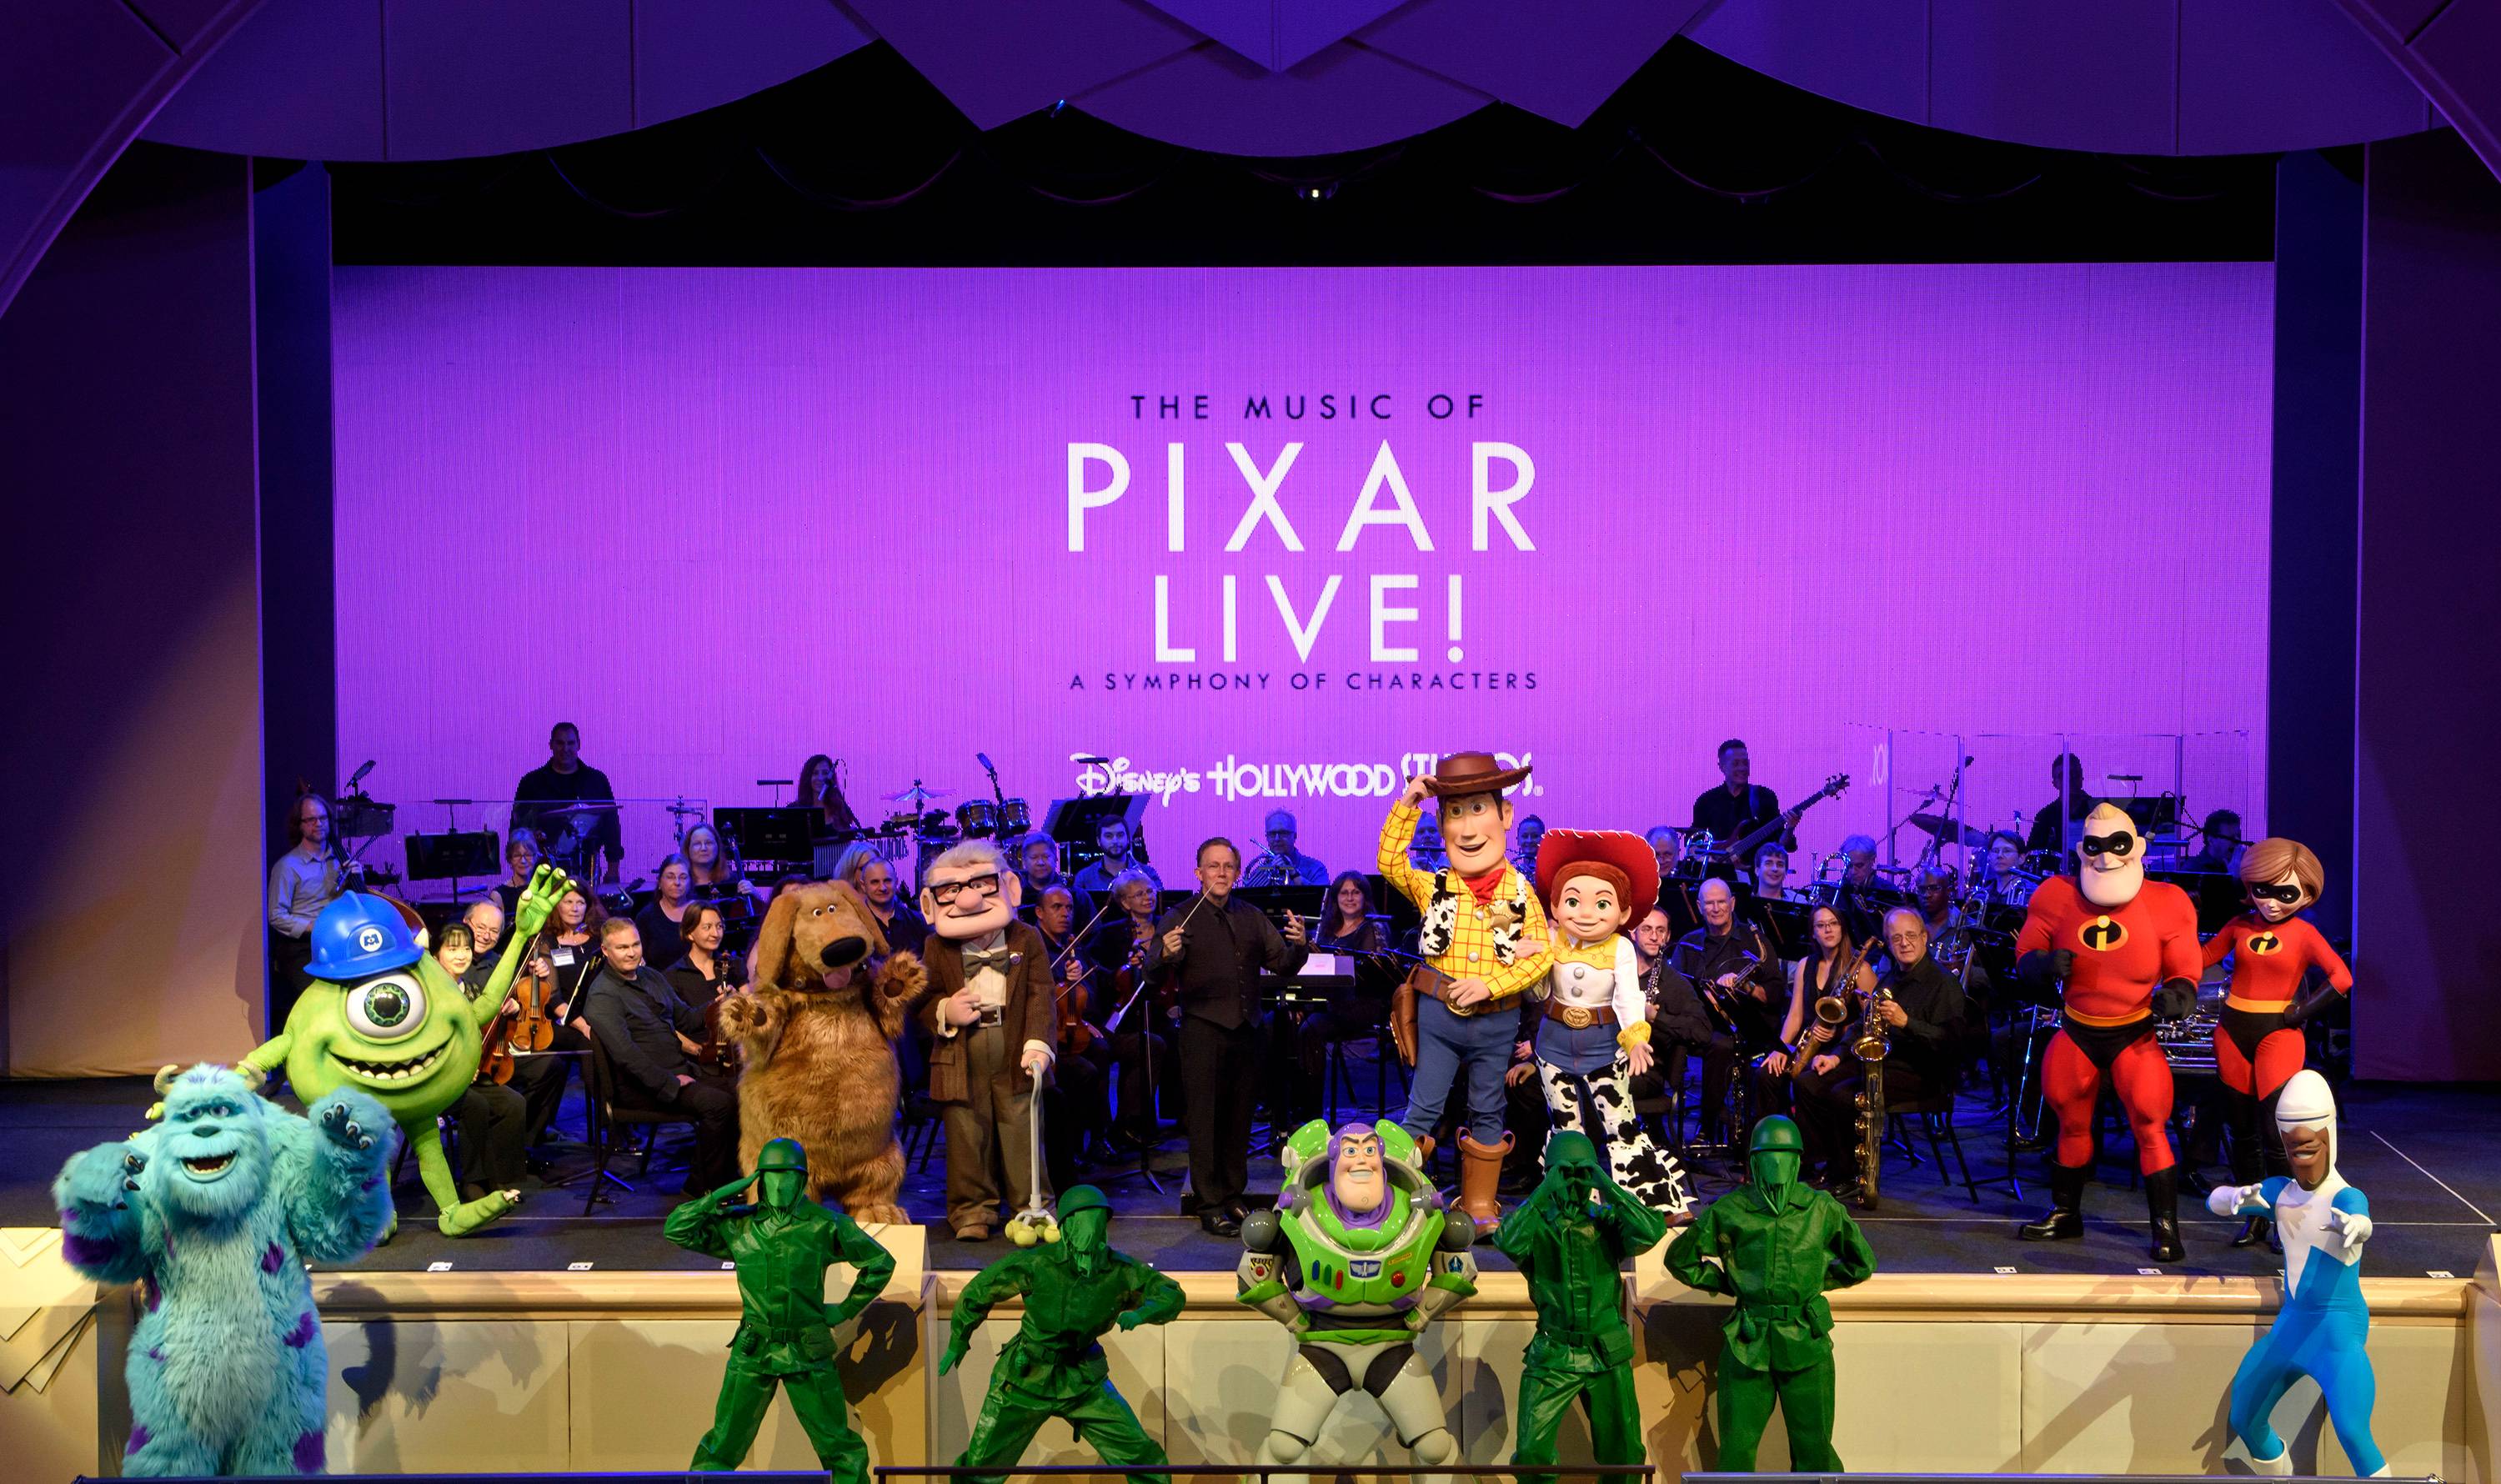 A concert show played back in 2017 feature music from PIXAR